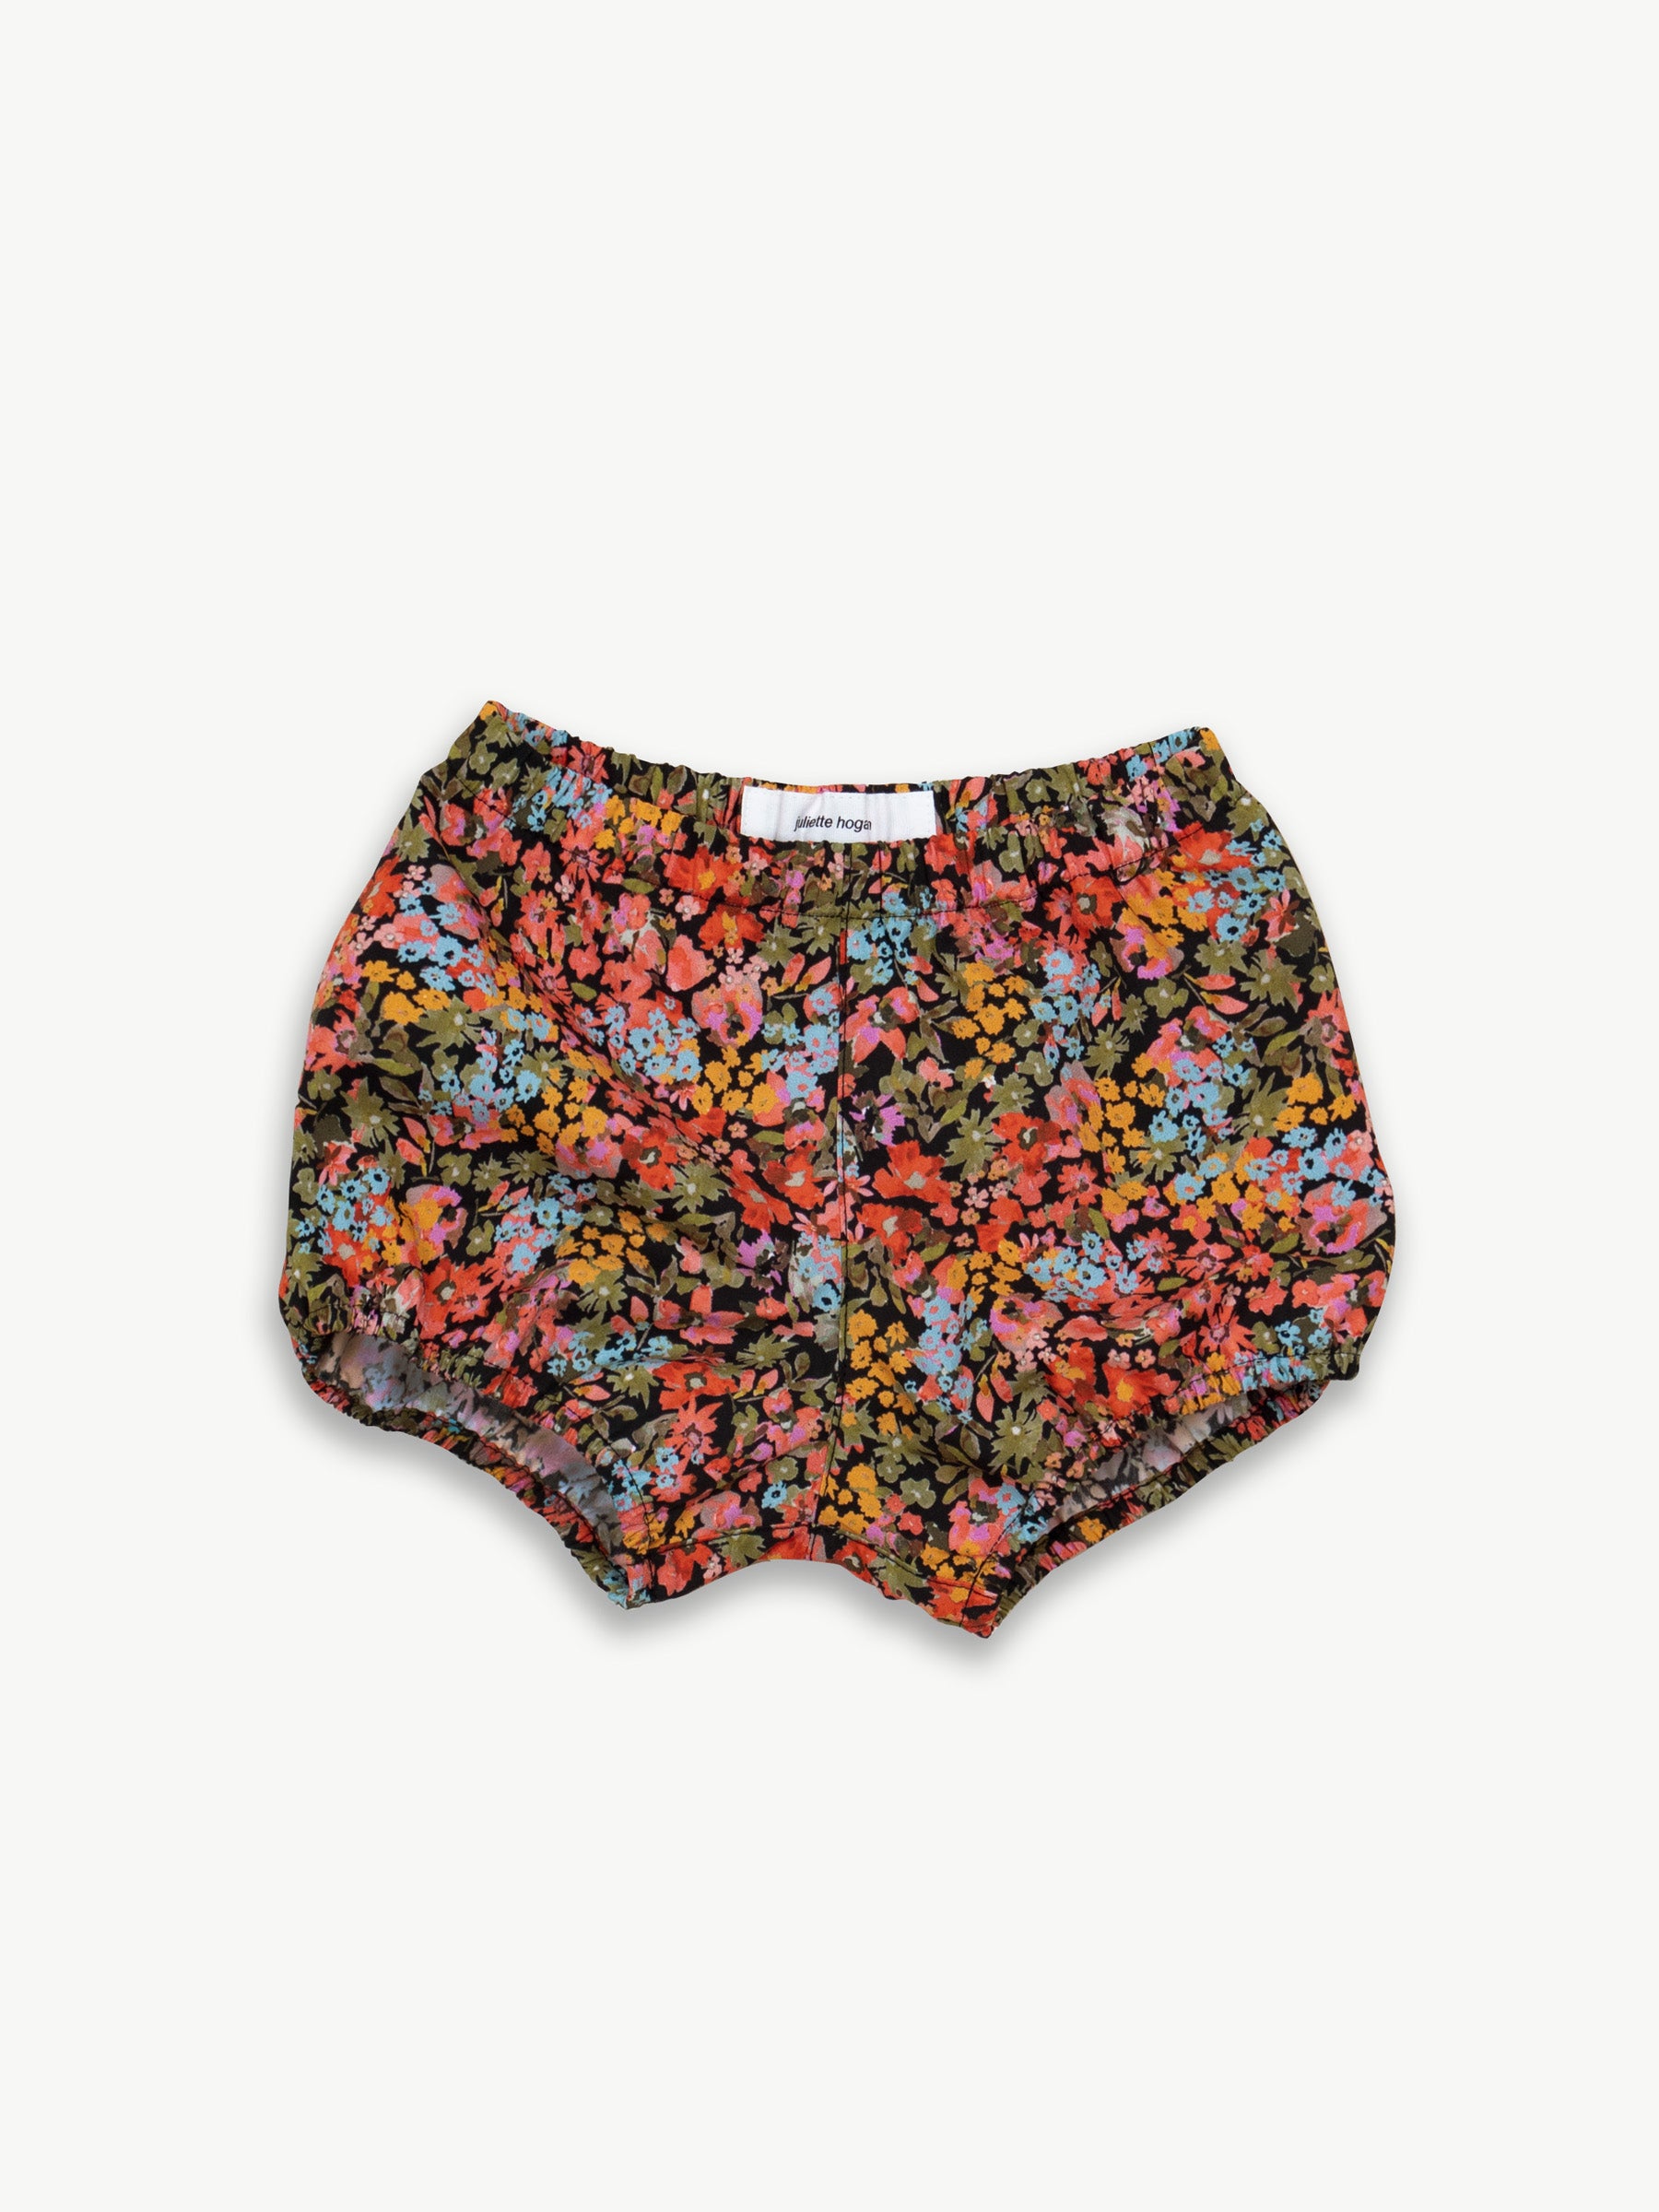 CPAG Baby Bloomer (Pop Floral Cotton) Brights